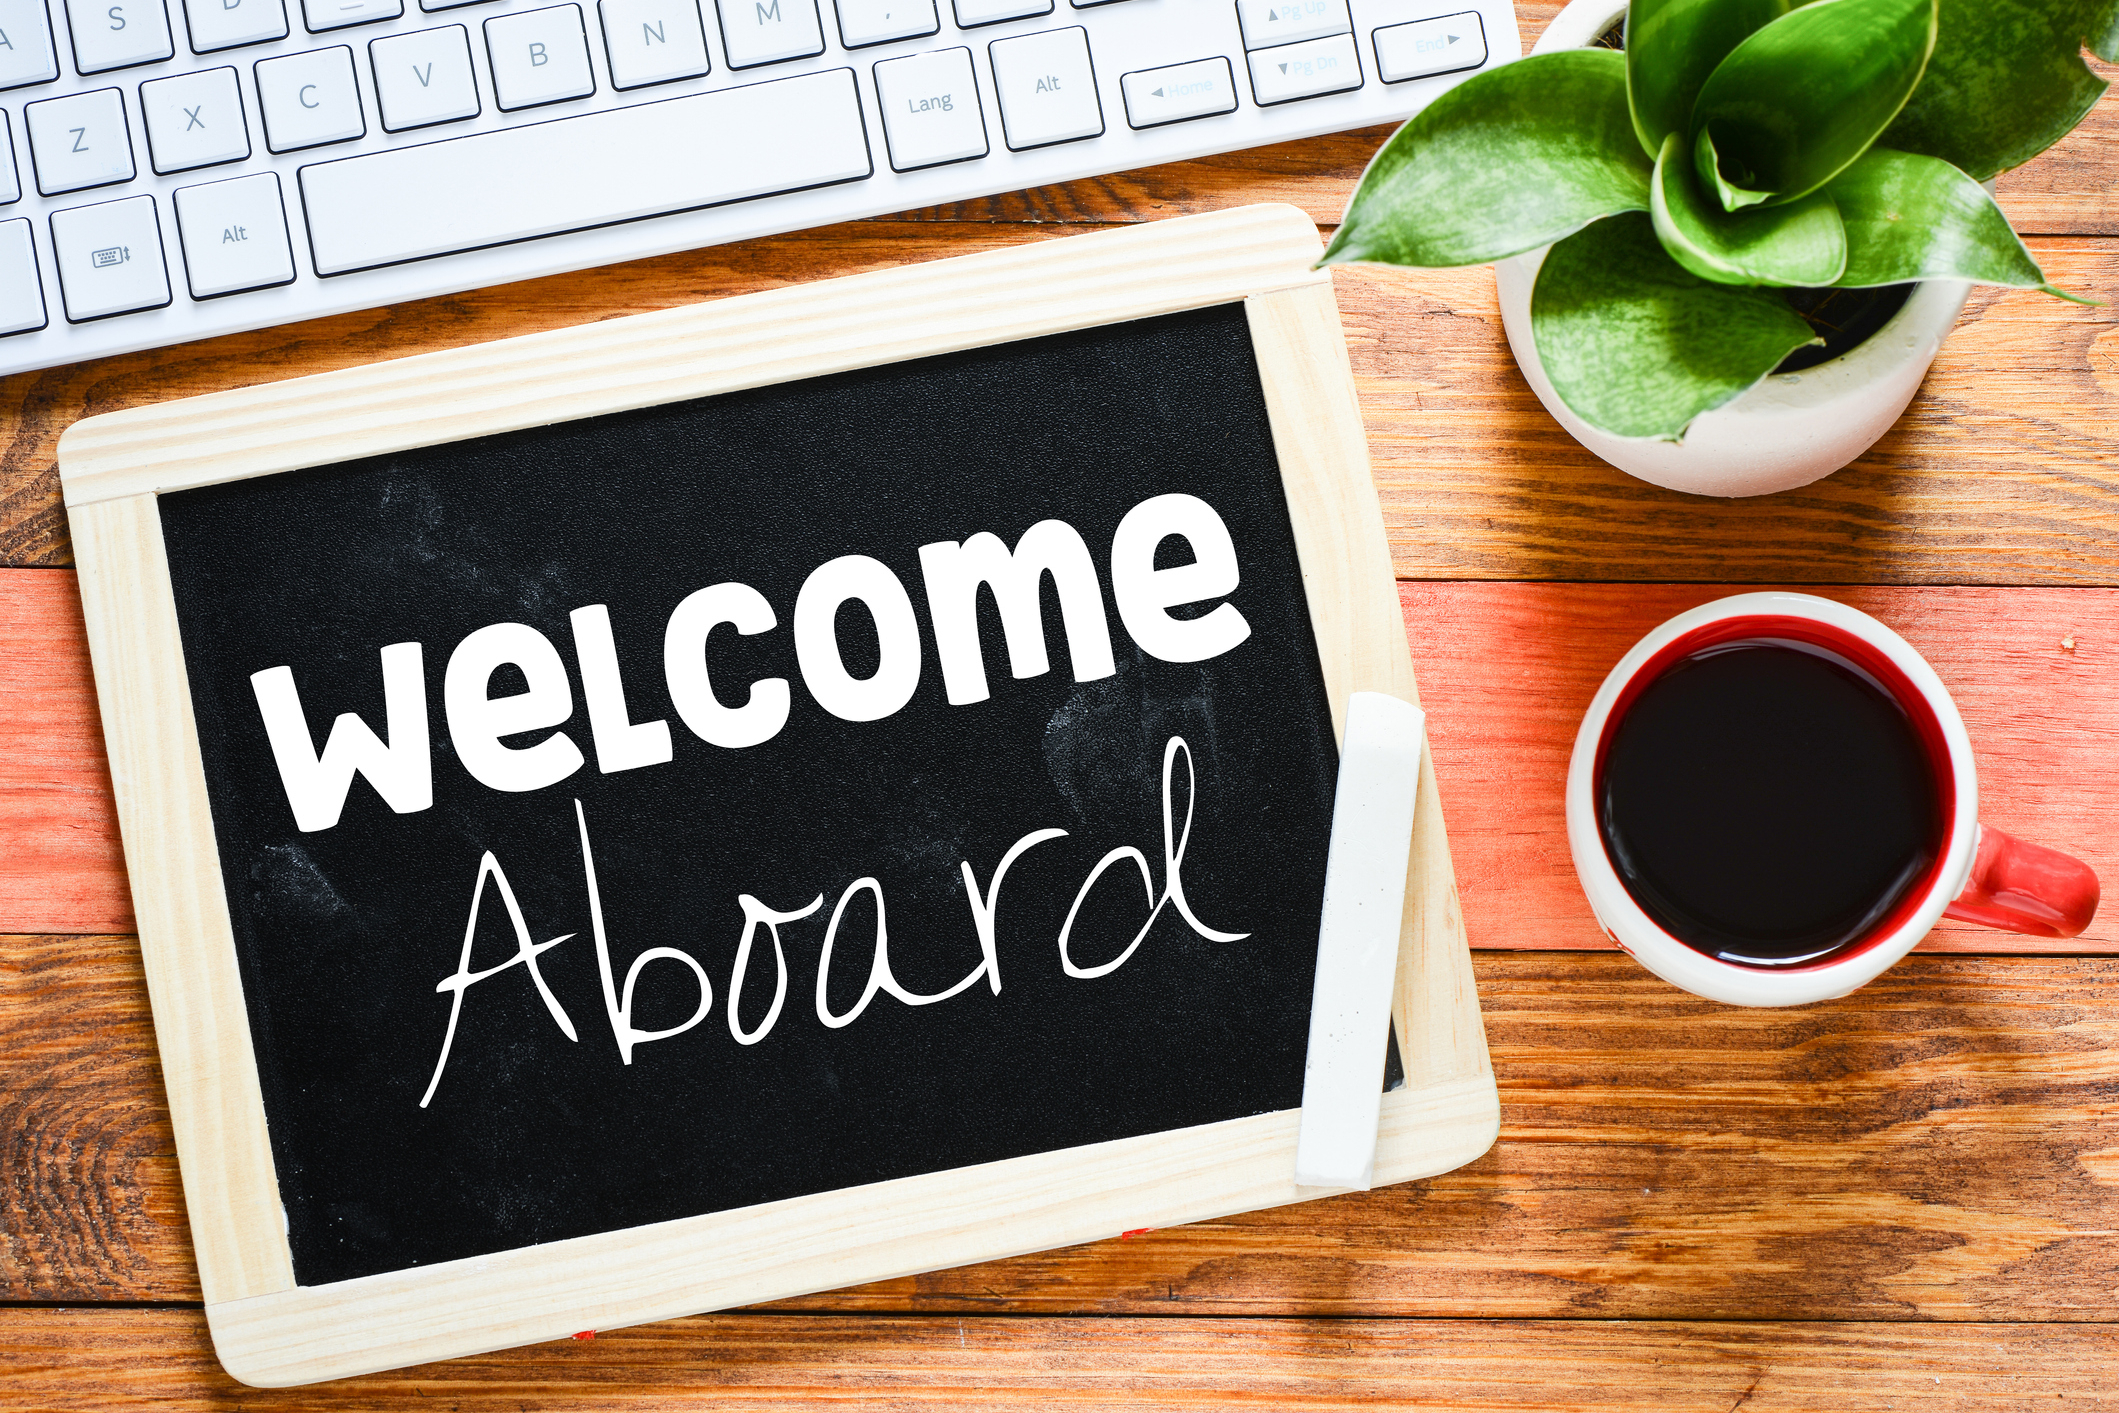 Best Ways For Companies To Welcome Their New Hires And Bring Them On Board…